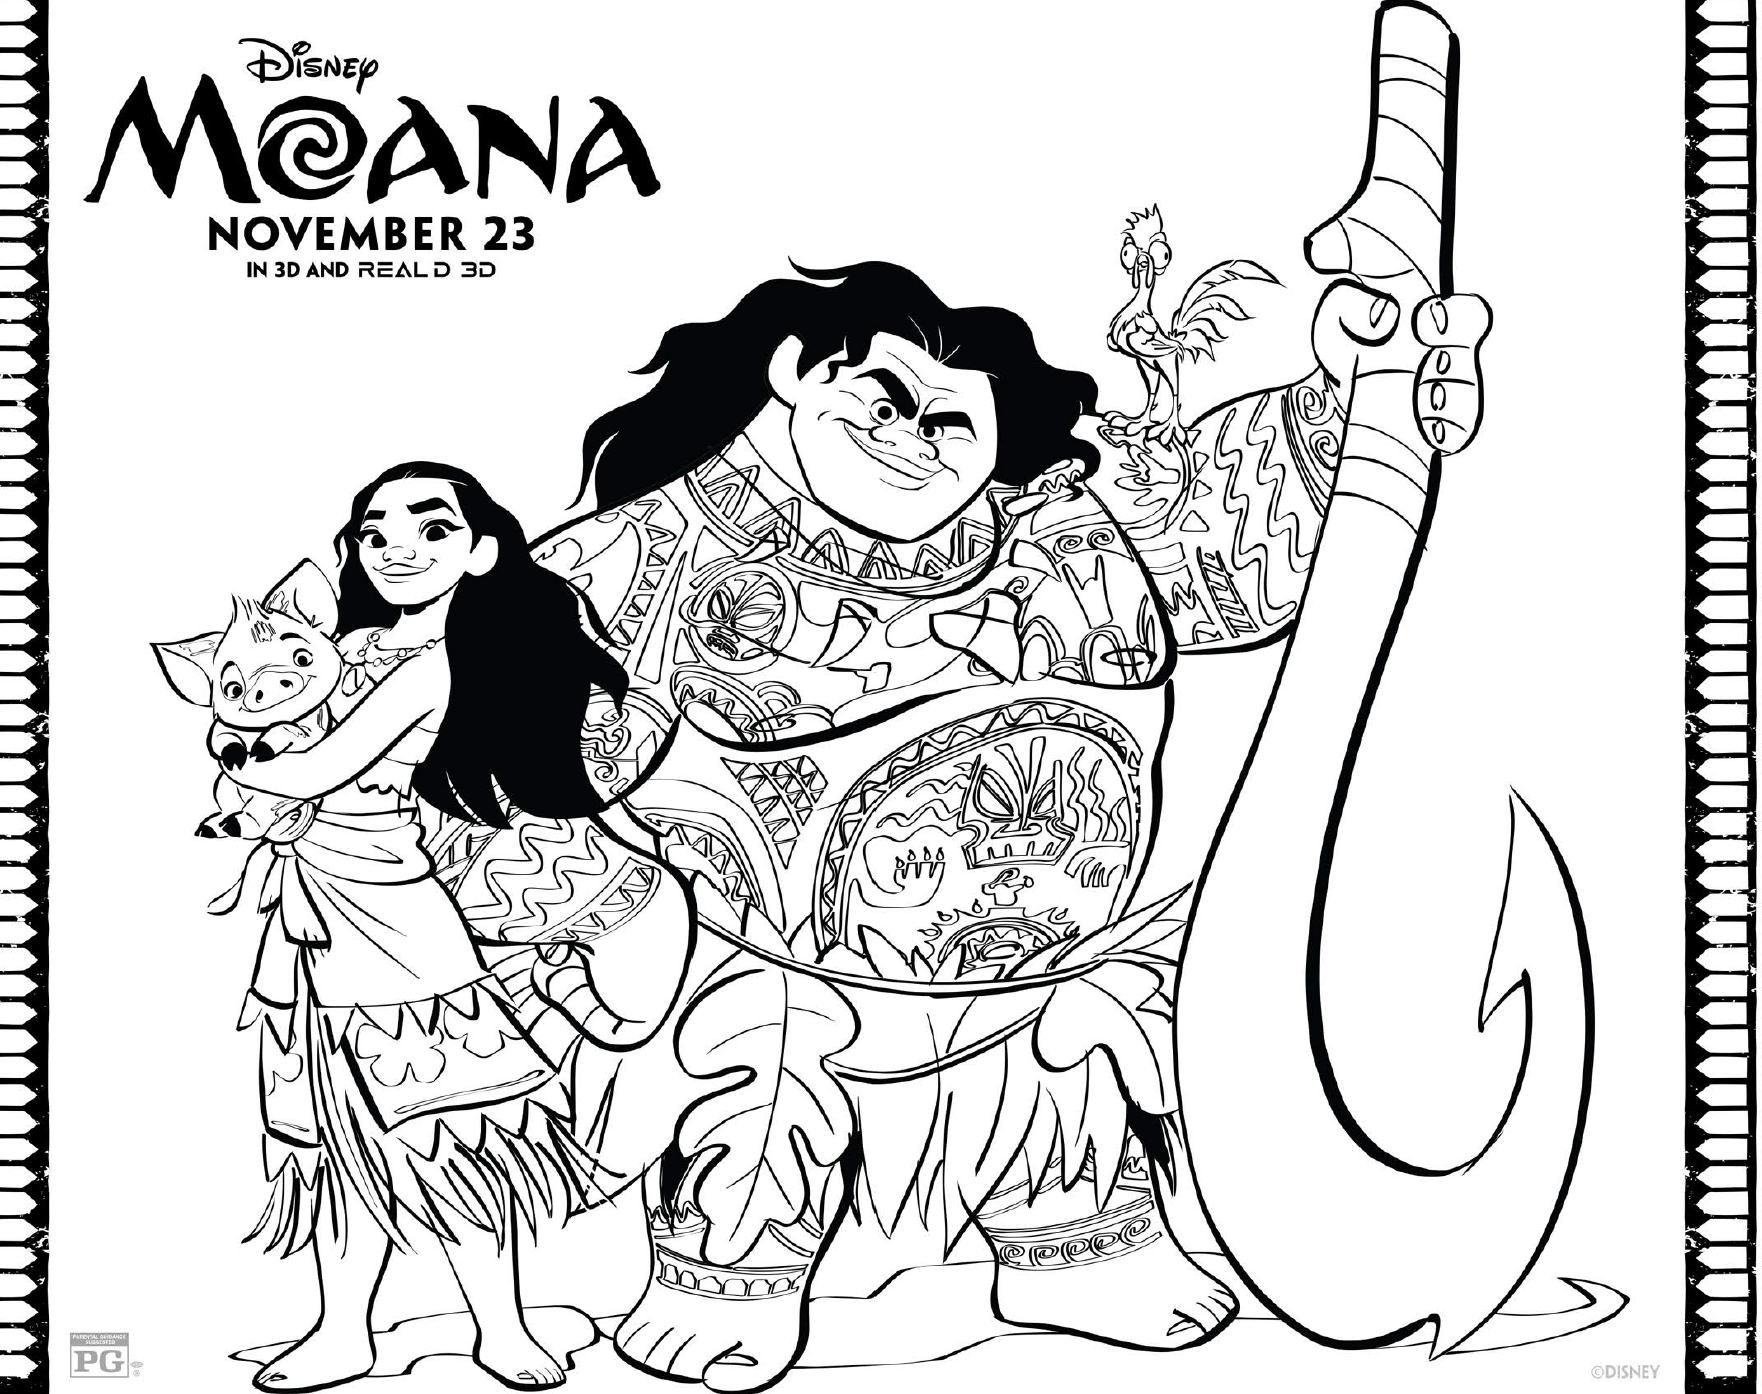 Download Printables Here #Moana | Lady ...